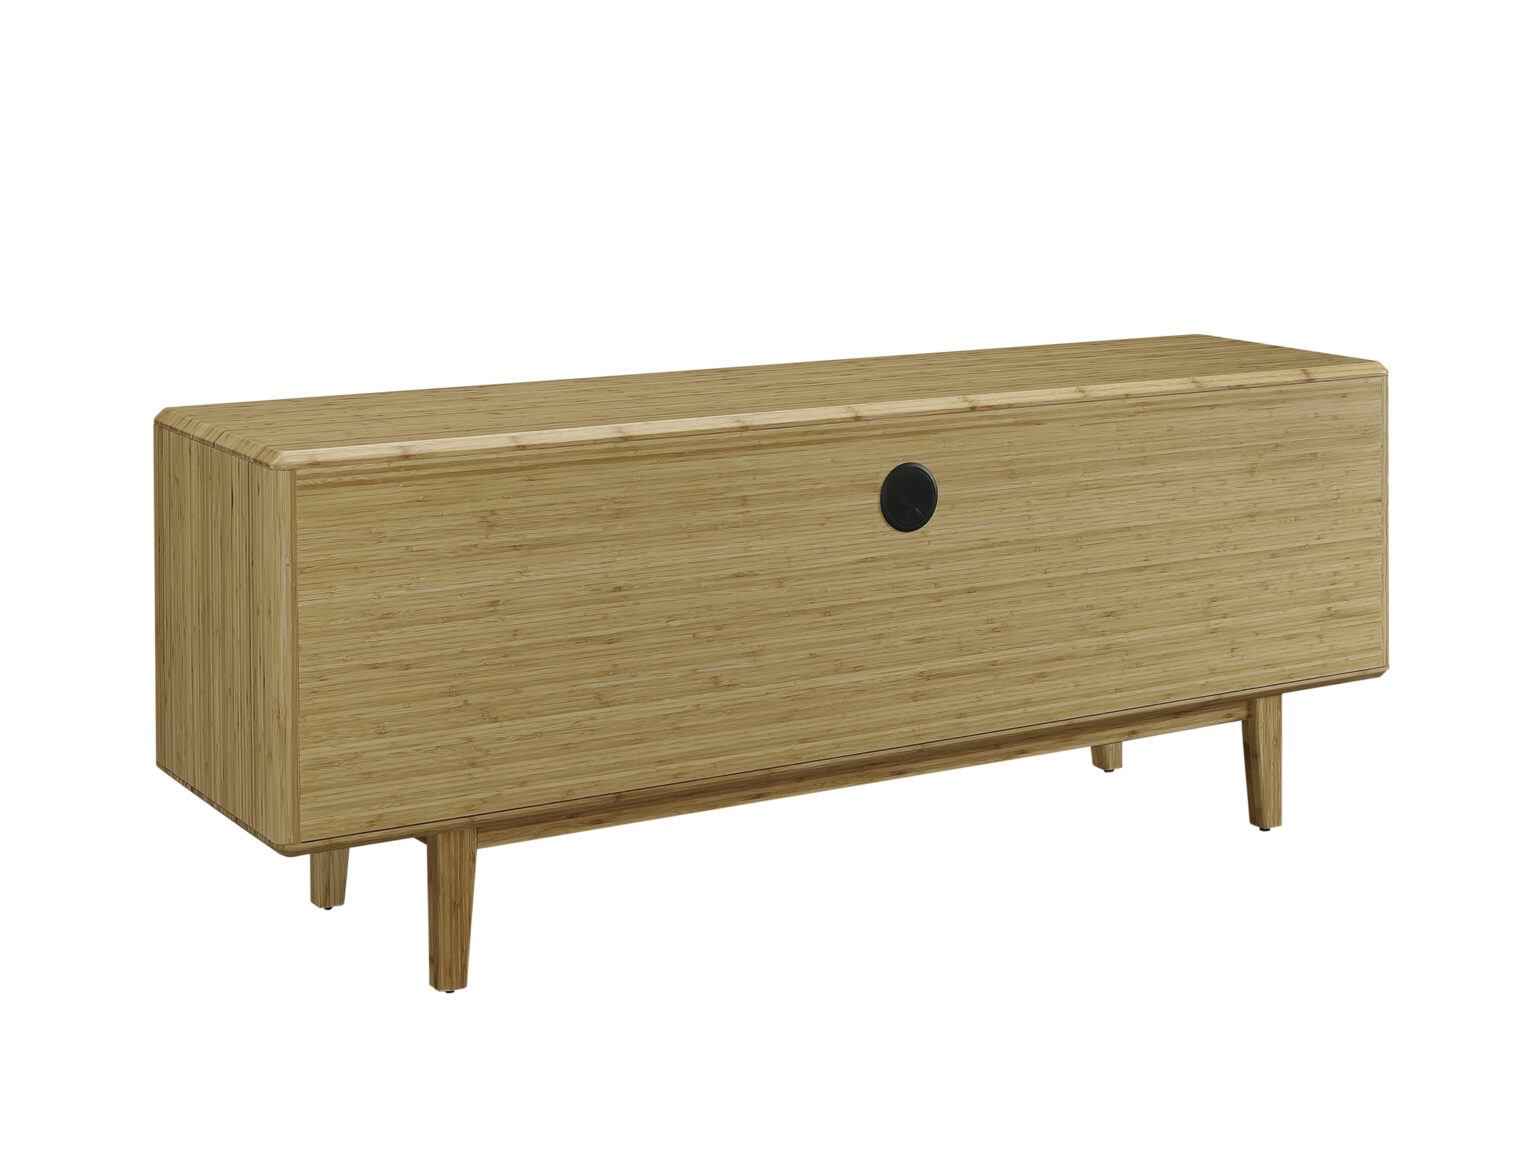 Currant Sideboard Caramelized_Rear View_Greenington